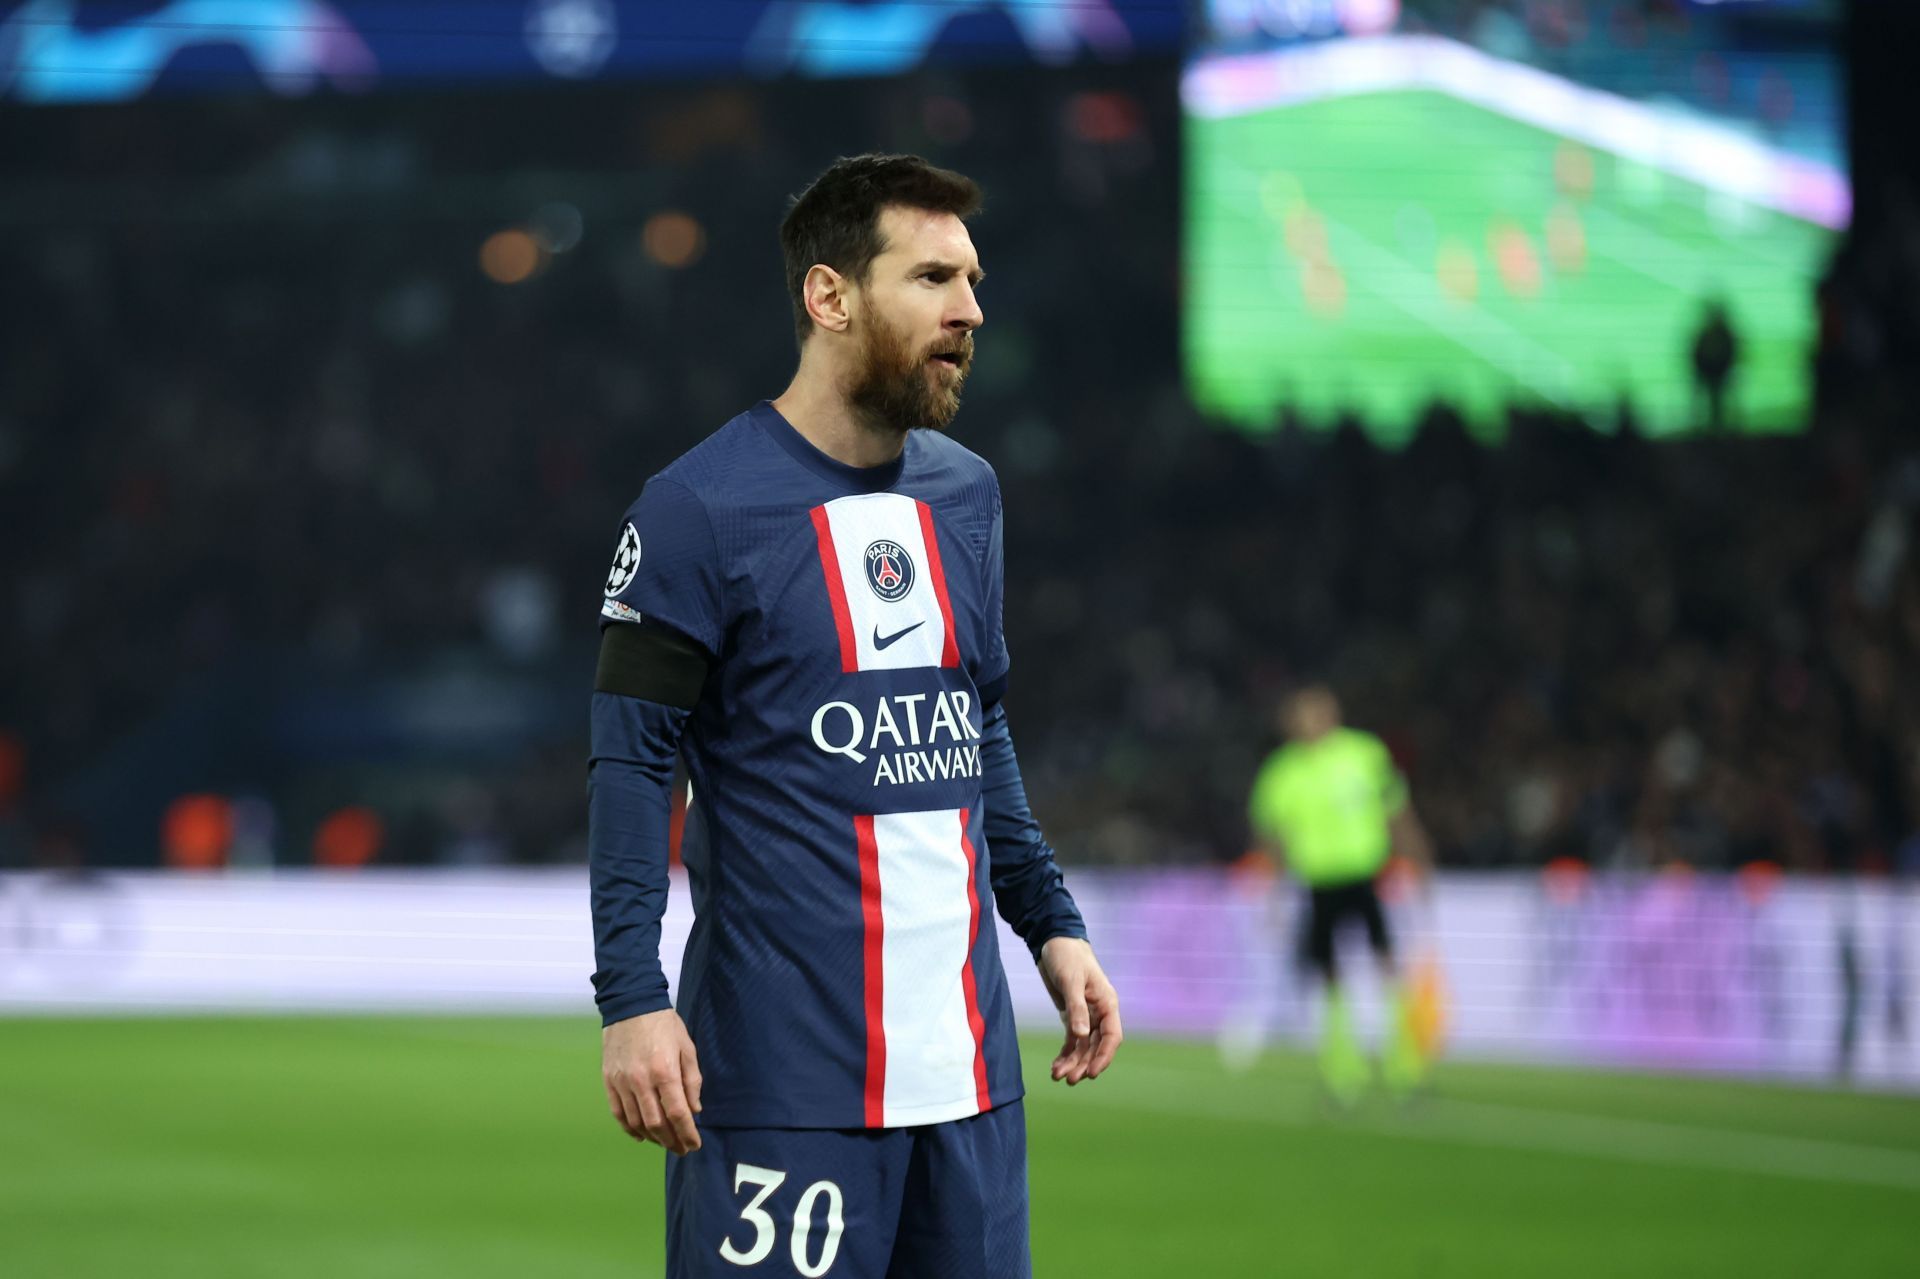 Lionel Messi&#039;s time at Paris Saint-Germain has not been as great as envisioned, but he remains one of the GOATs